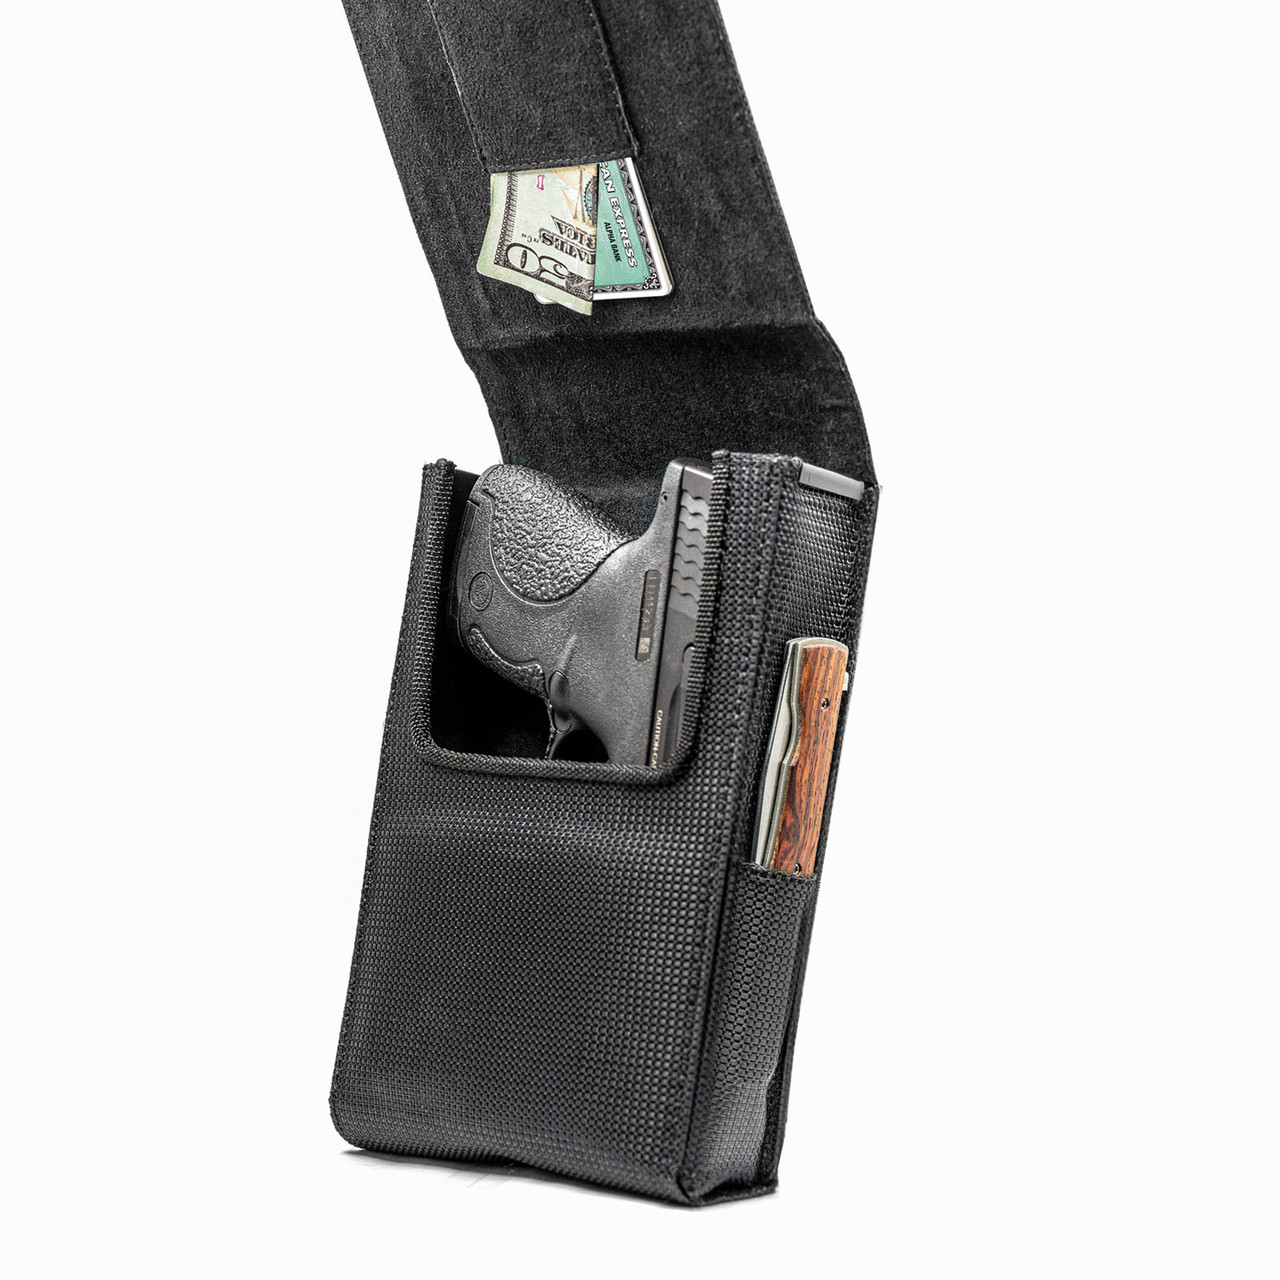 The Ruger LCP MAX Perfect Holster